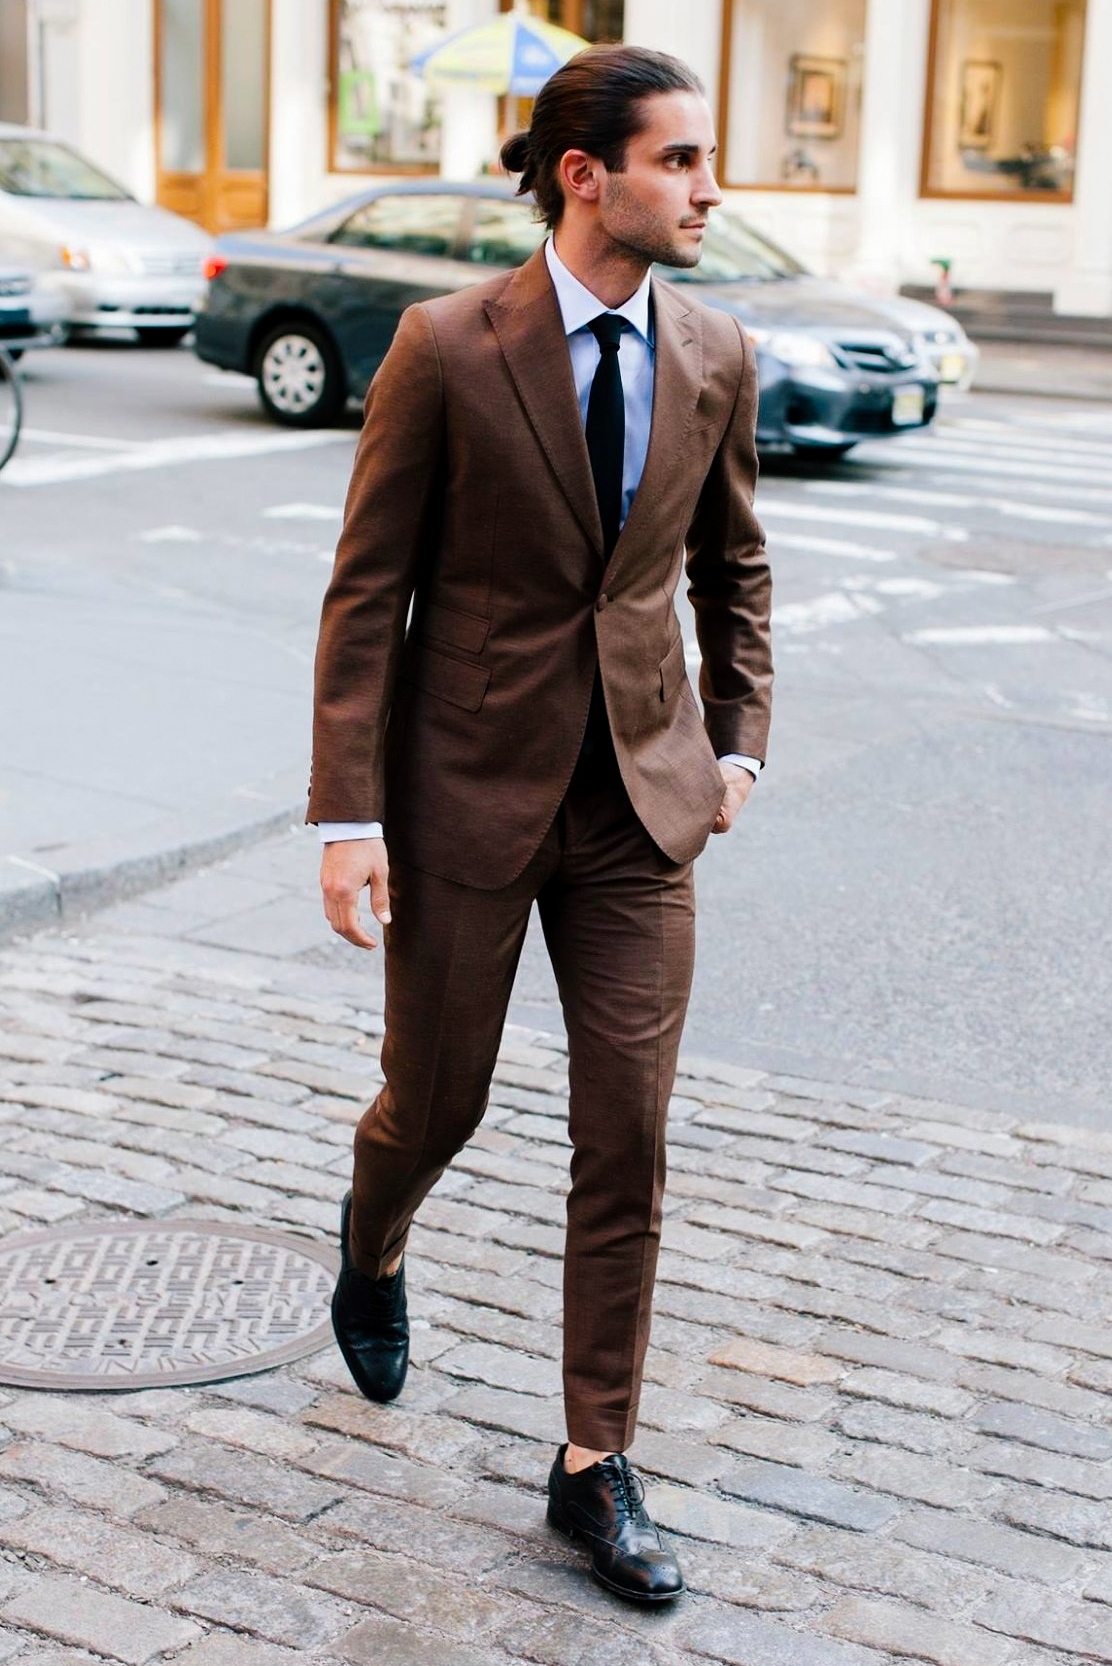 Brown suit and white dress shirt with a black tie